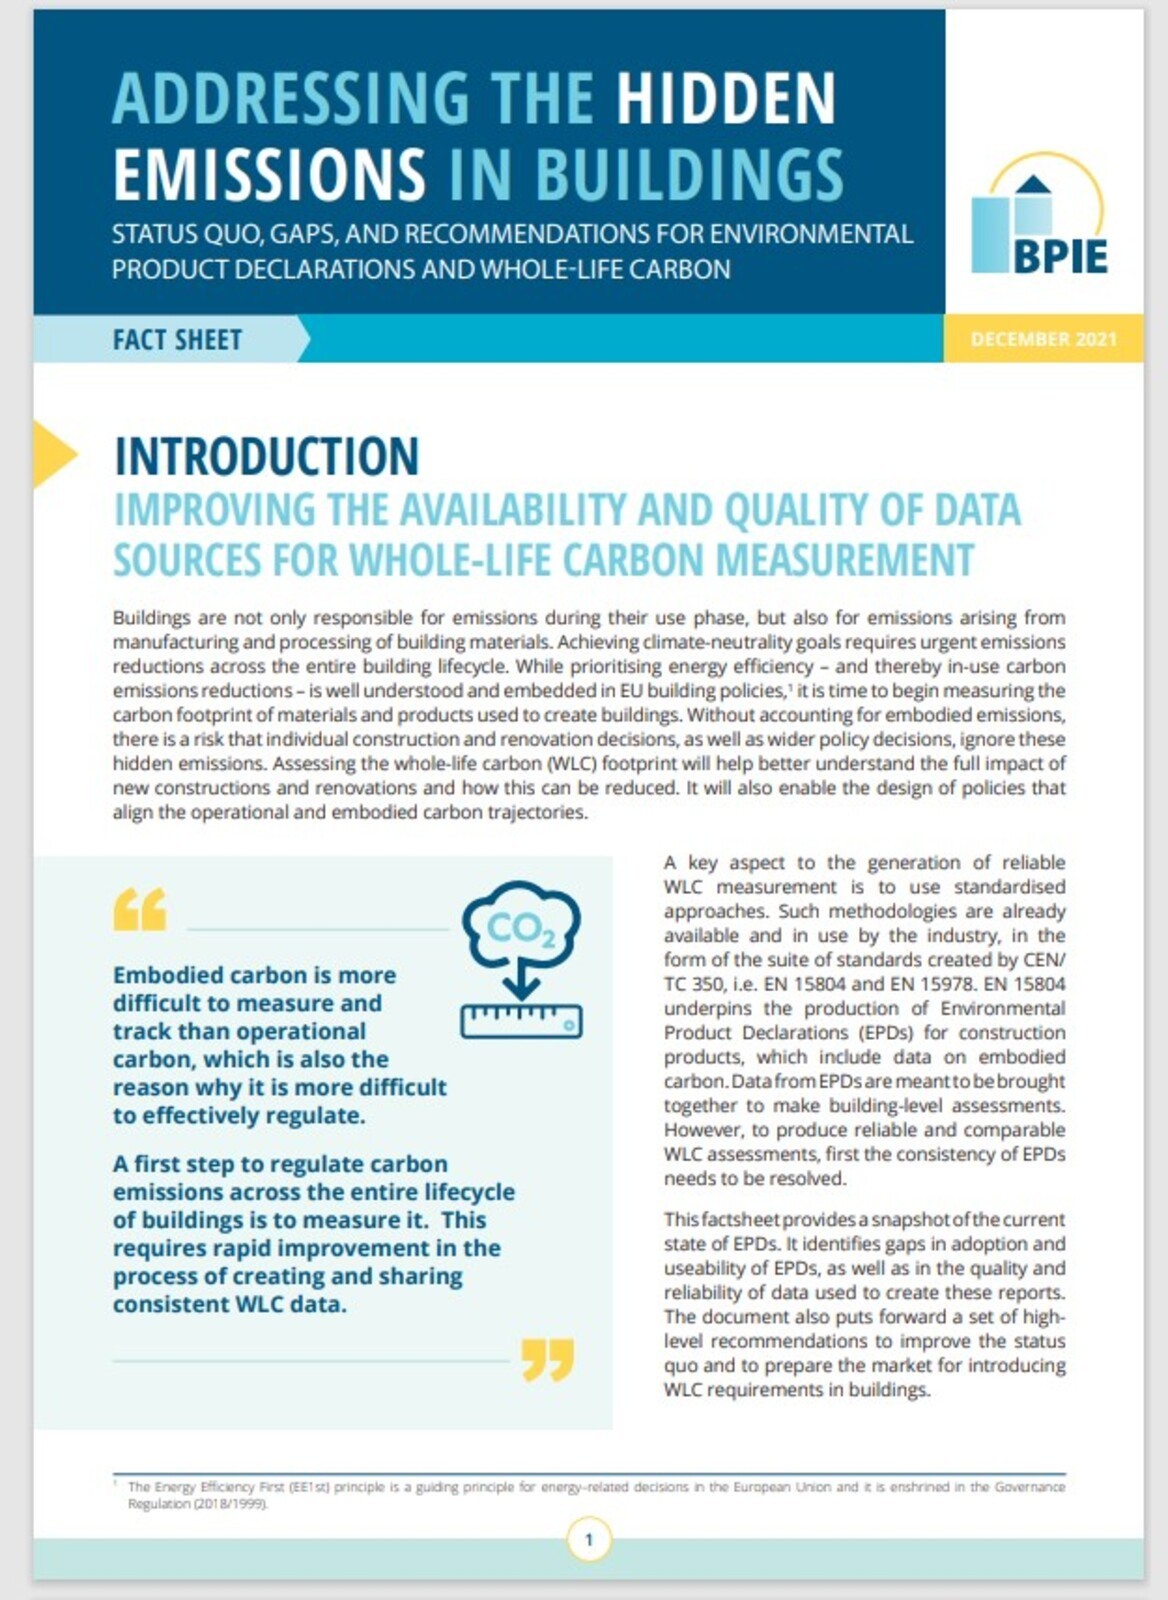 Addressing the Hidden Emissions in Buildings: Status quo, gaps and recommendations for Environmental Product Declarations and Whole-Life Carbon 